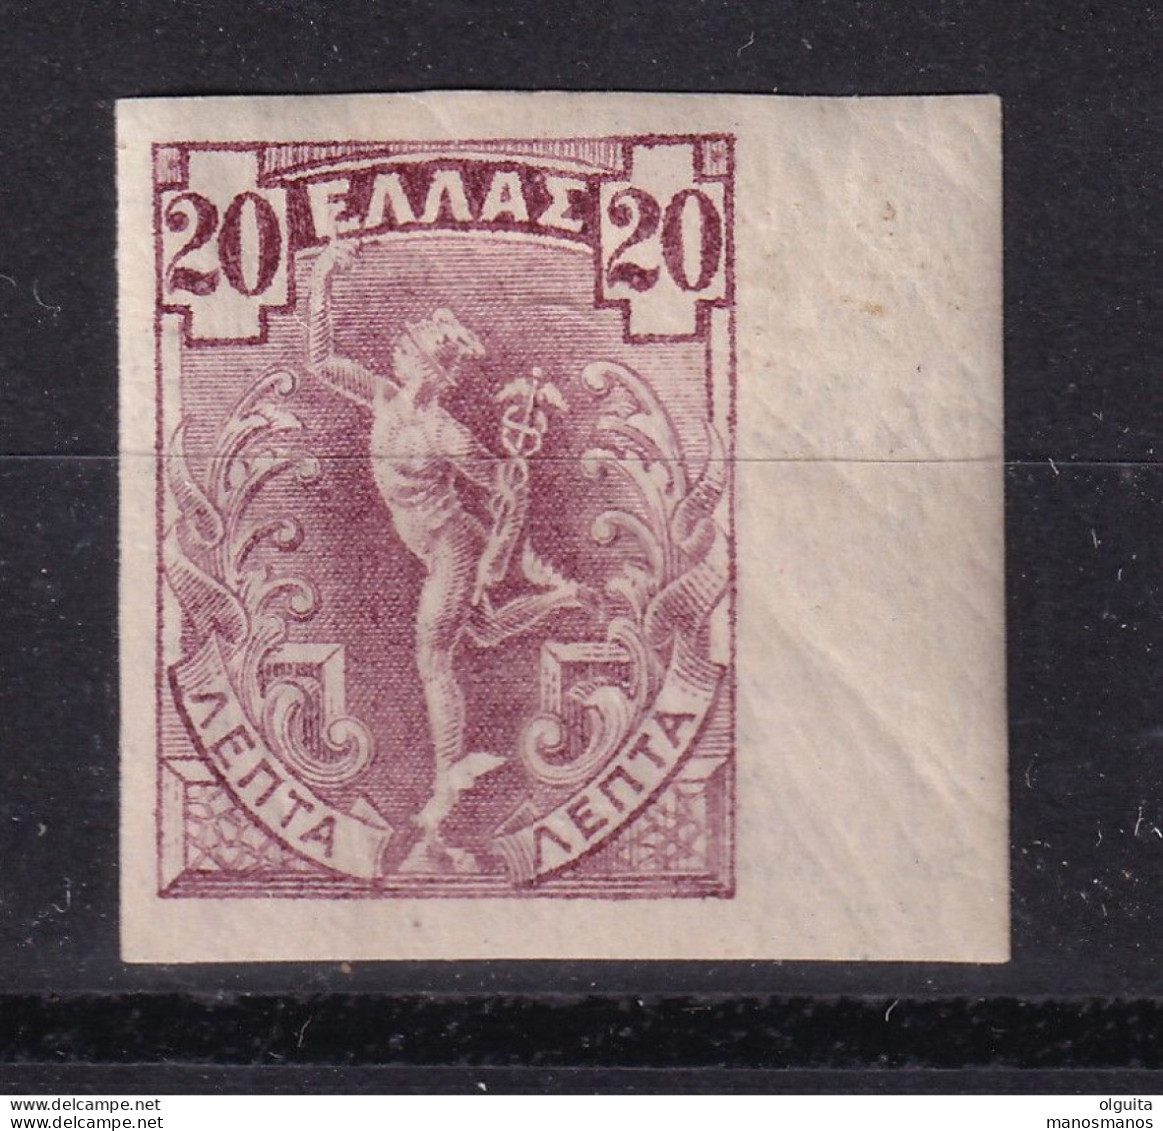 DCPGR 090 - GREECE Iptamenos - Imperforate Marginal 20 Lepta In Definitive Colour - Mint Lightly Hinged - Charity Issues